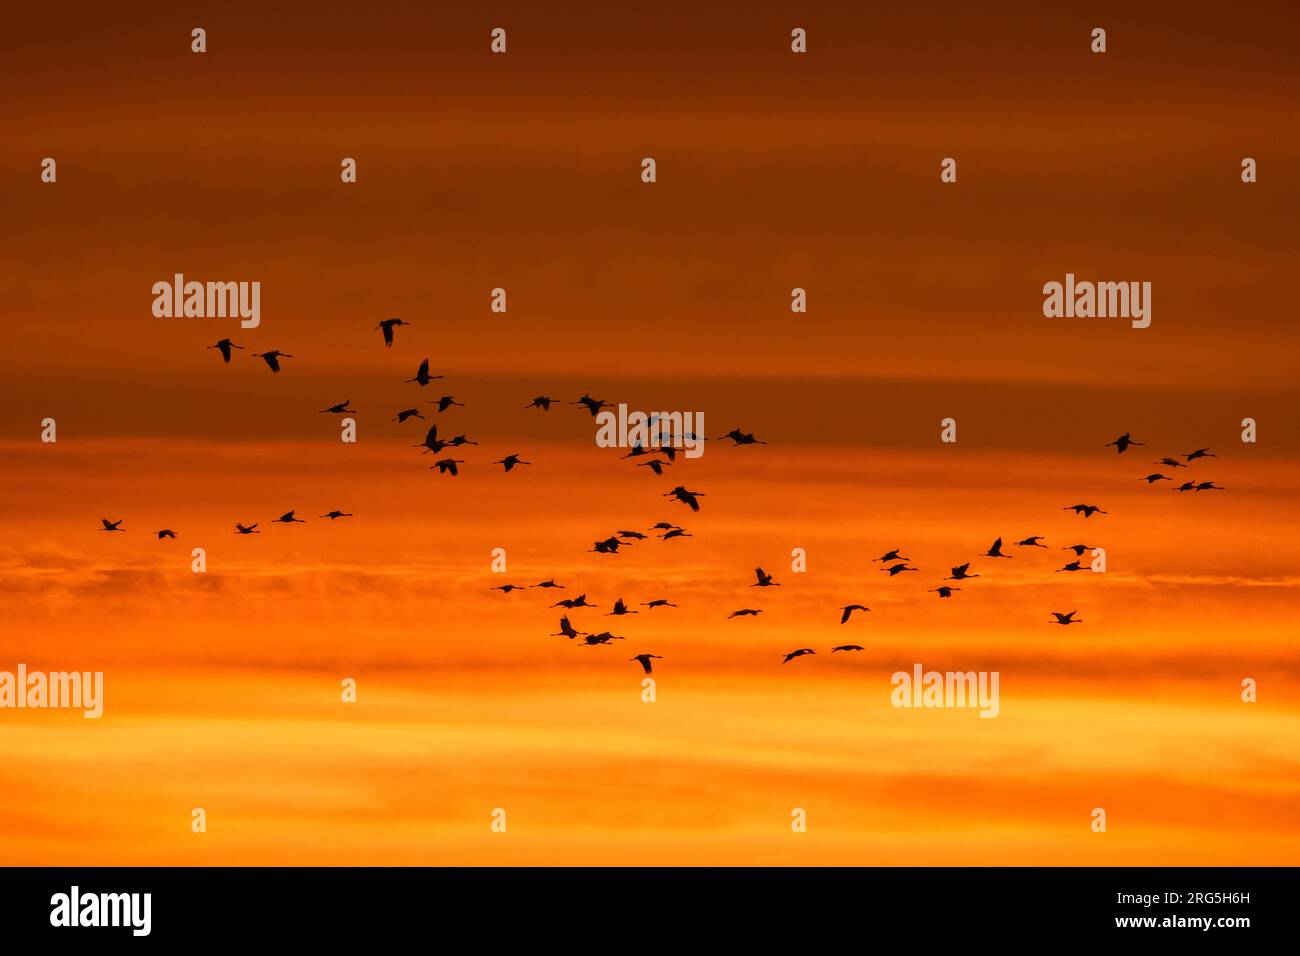 Migrating flock of common cranes / Eurasian cranes (Grus grus) in flight silhouetted against orange sunset sky during migration in autumn / fall Stock Photo